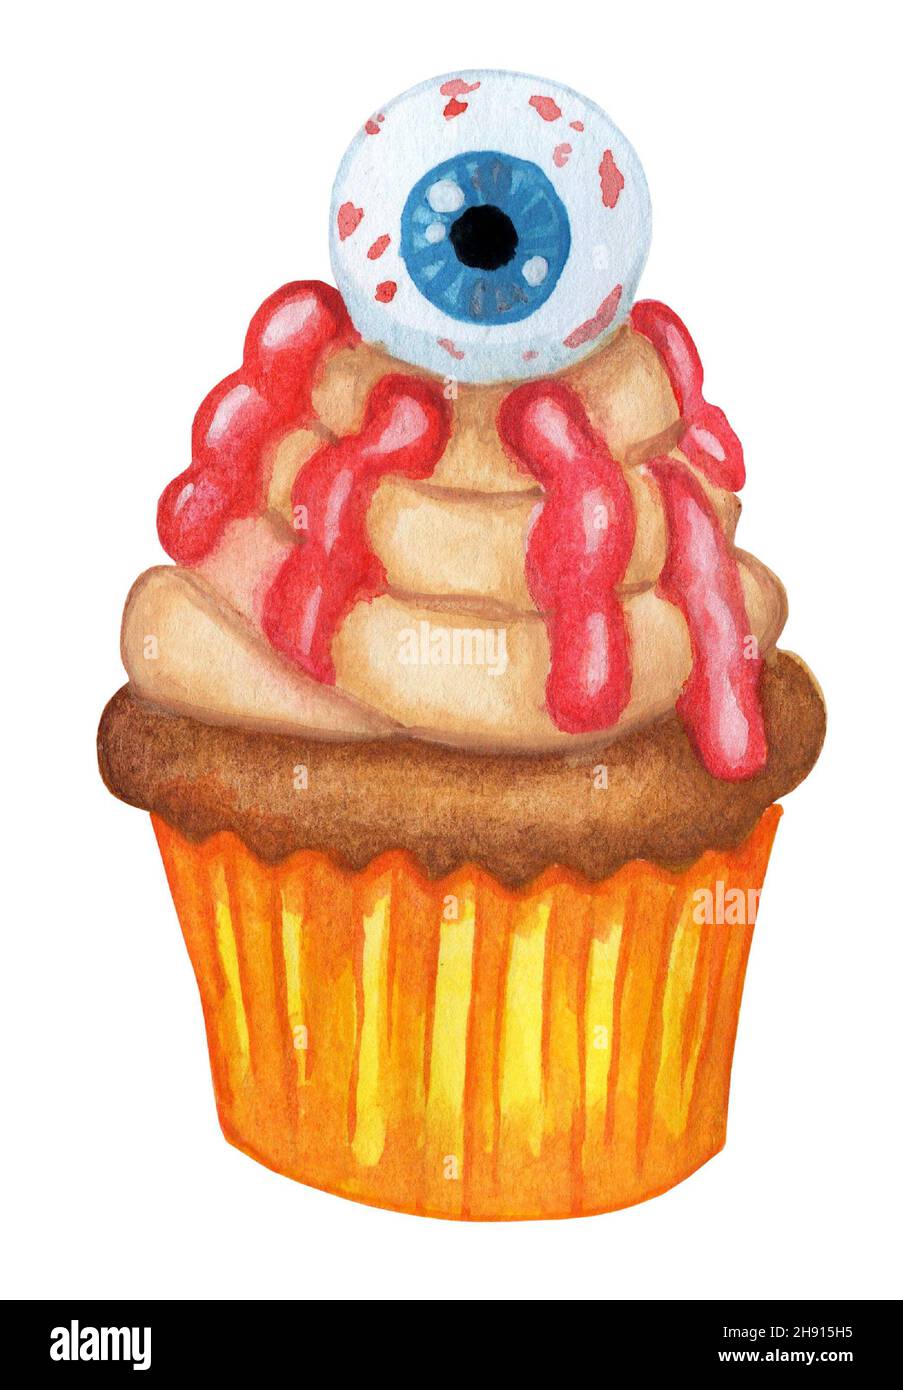 Festive halloween cupcake. Chocolate muffin in a yellow mold with beige cream and a big blue eye with blood. Watercolor illustration isolated on white Stock Photo